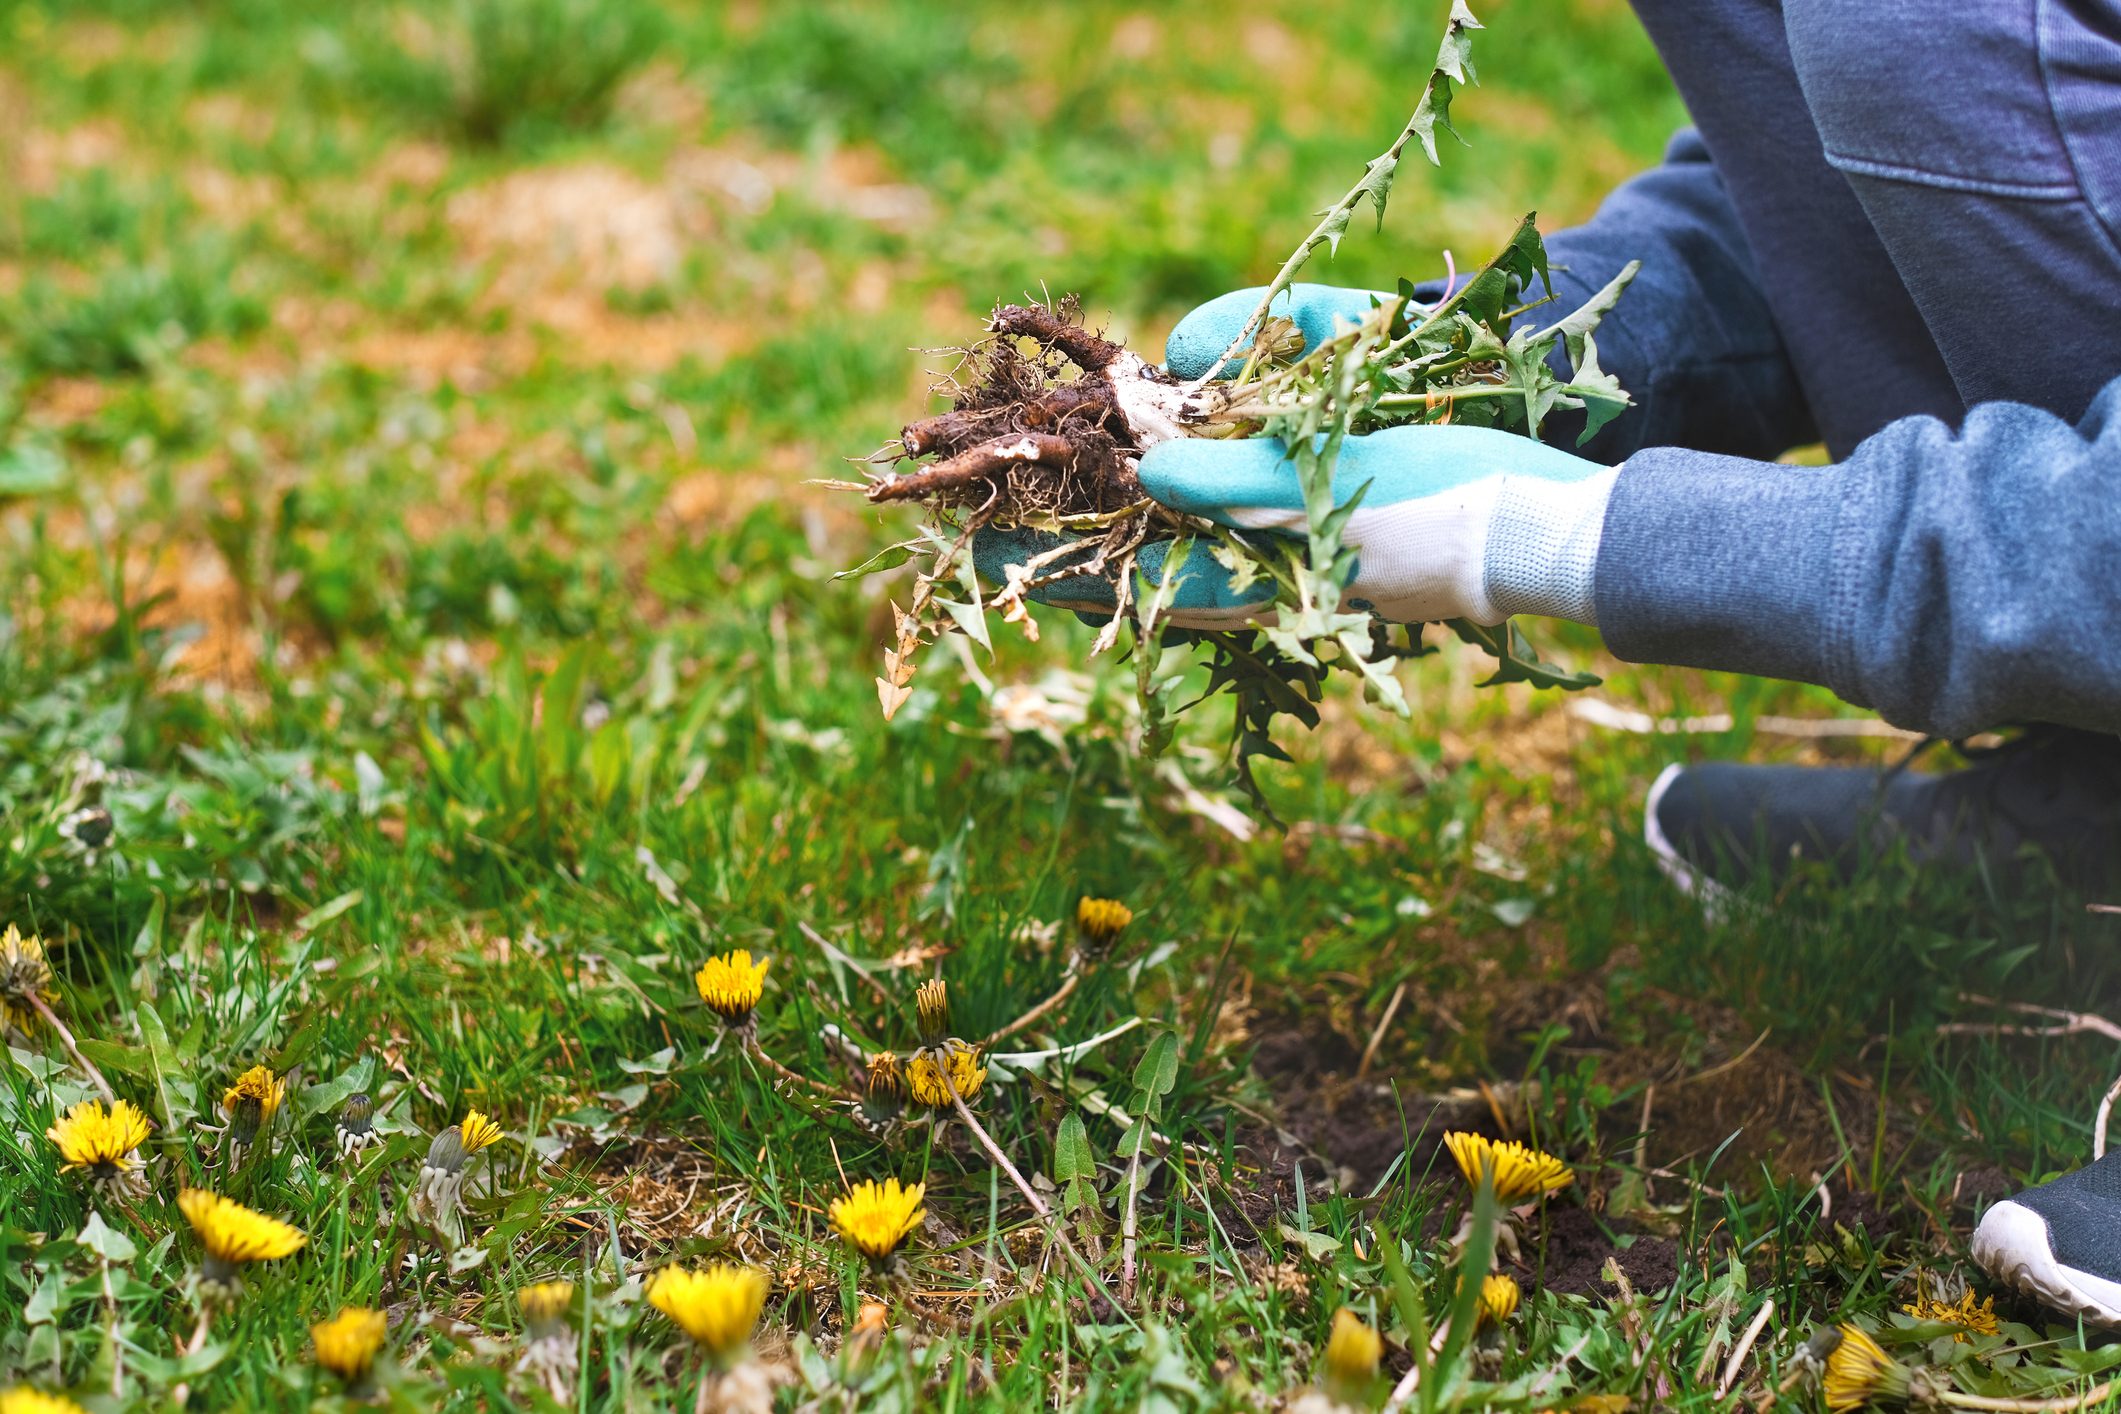 Young man hands wearing garden gloves removing weeds in his grass